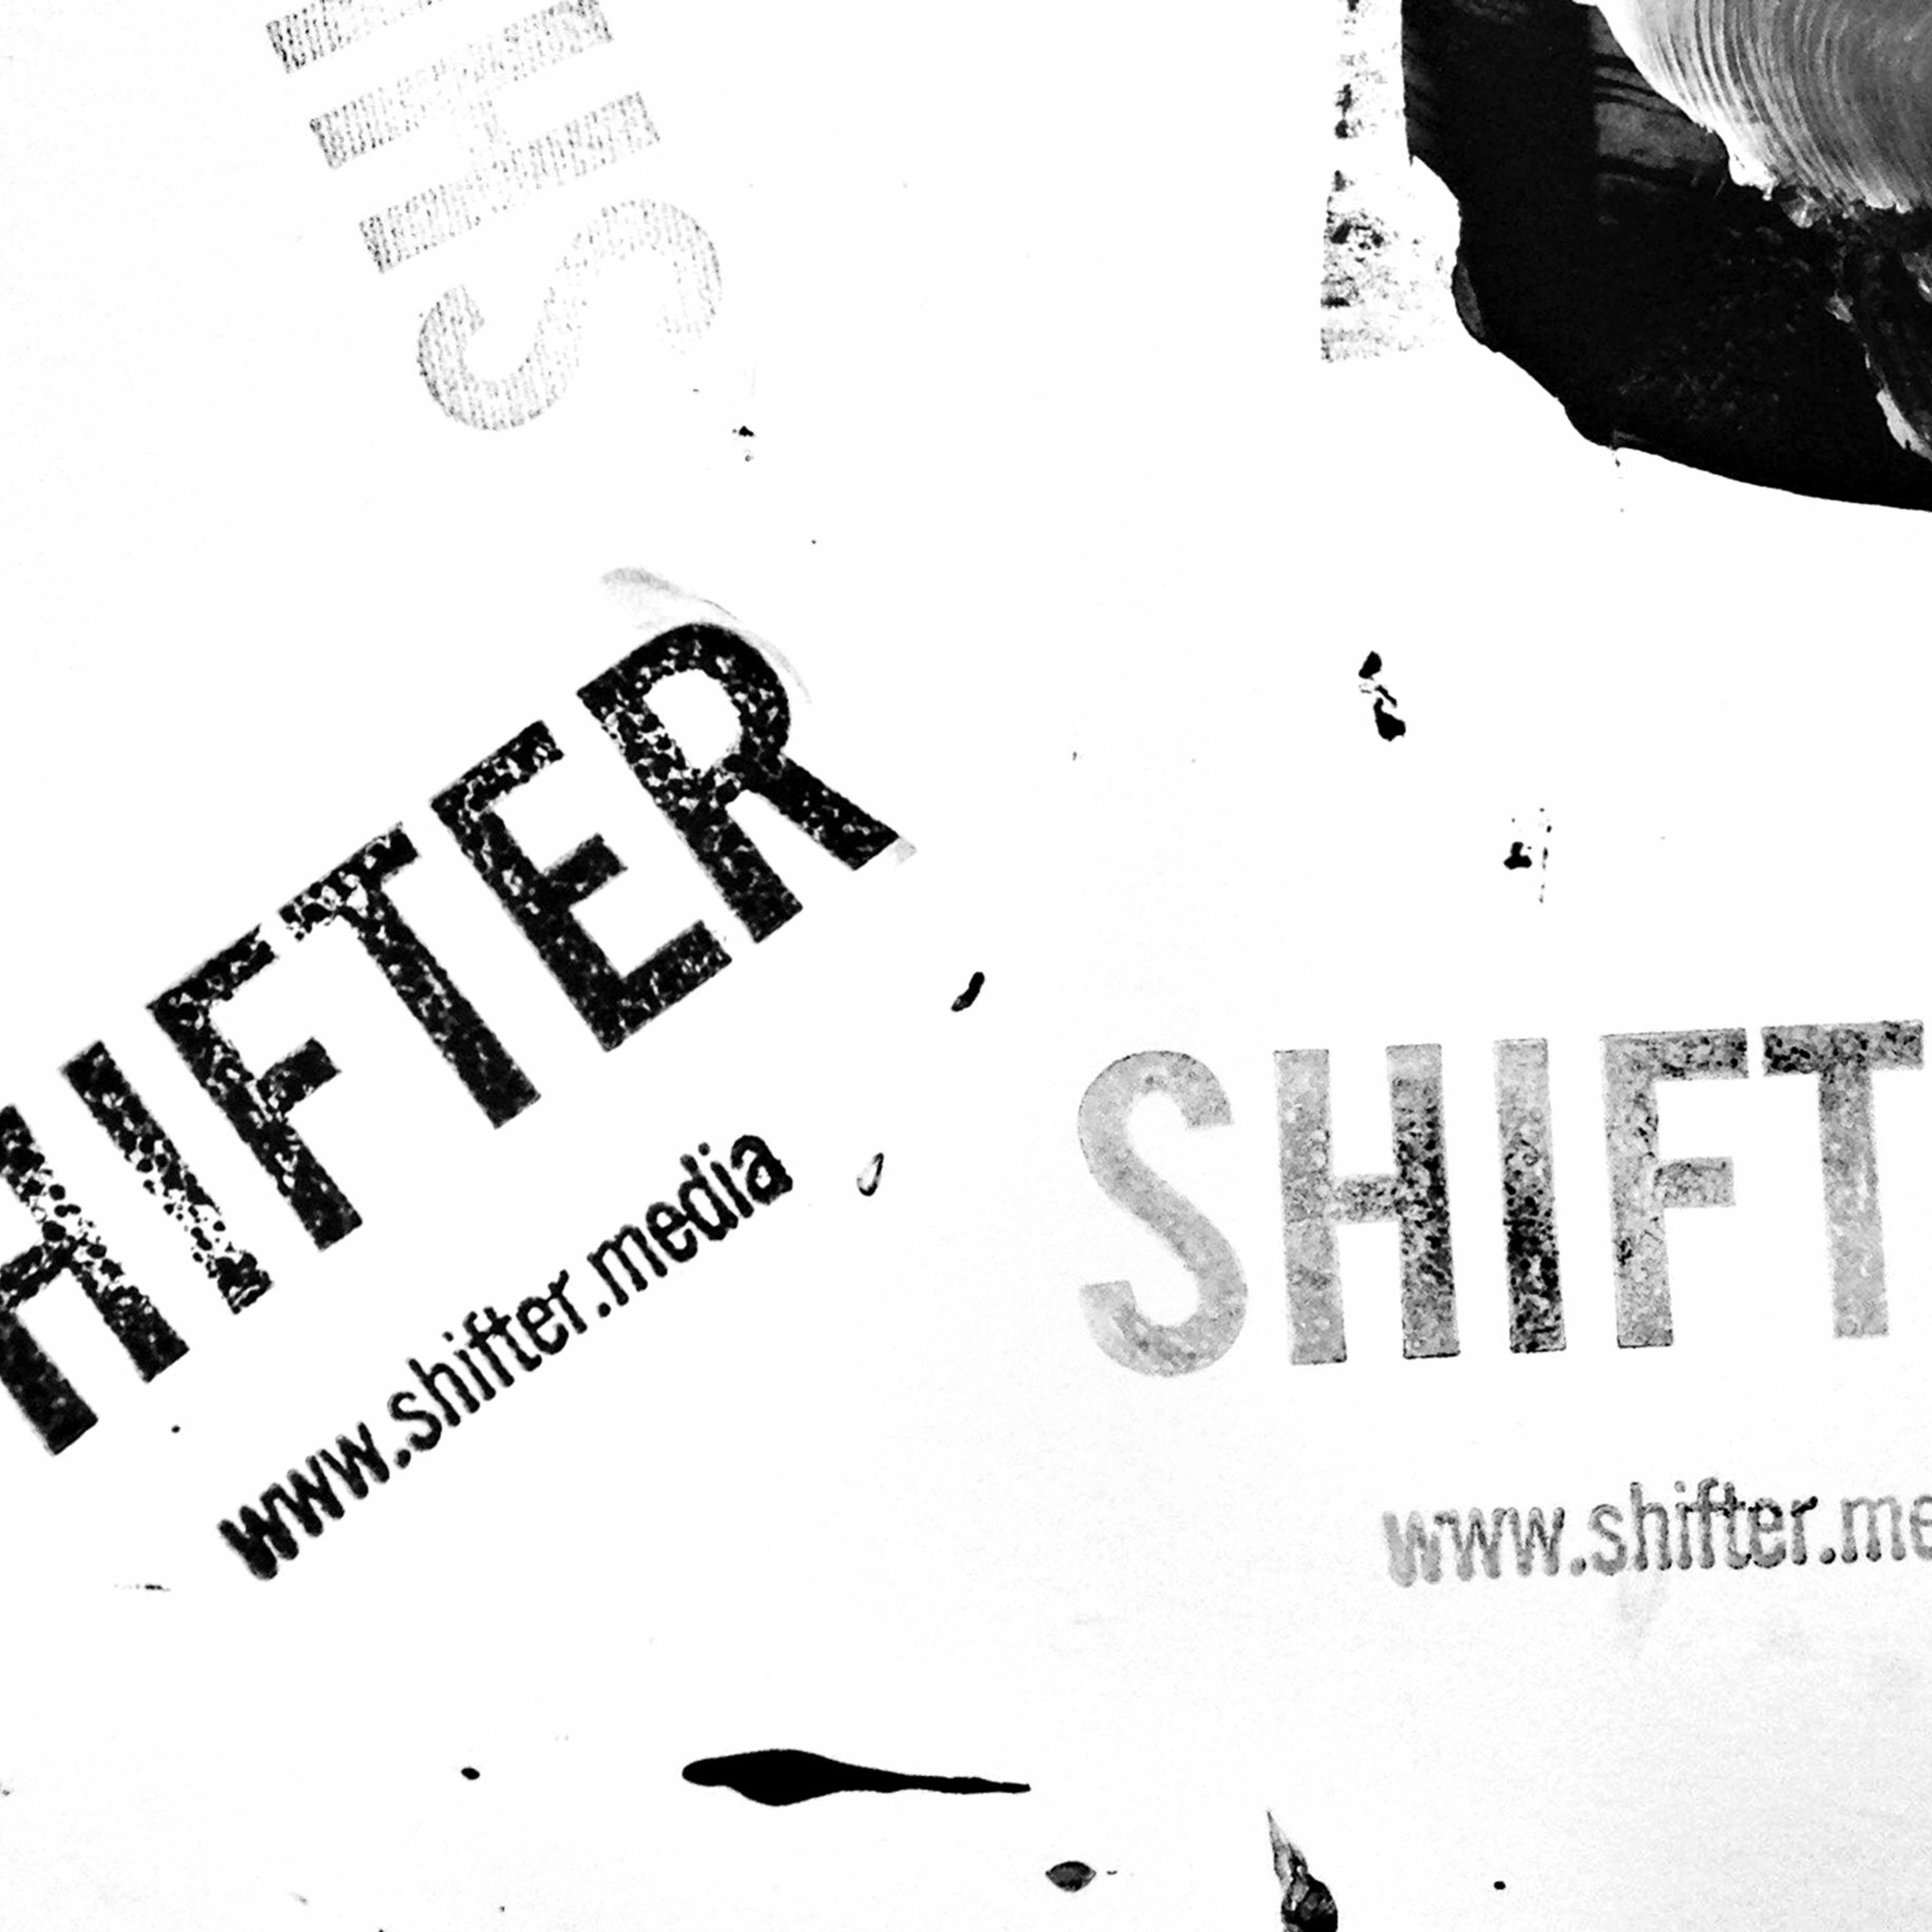 Shifter: Dispatches Ross Whitaker